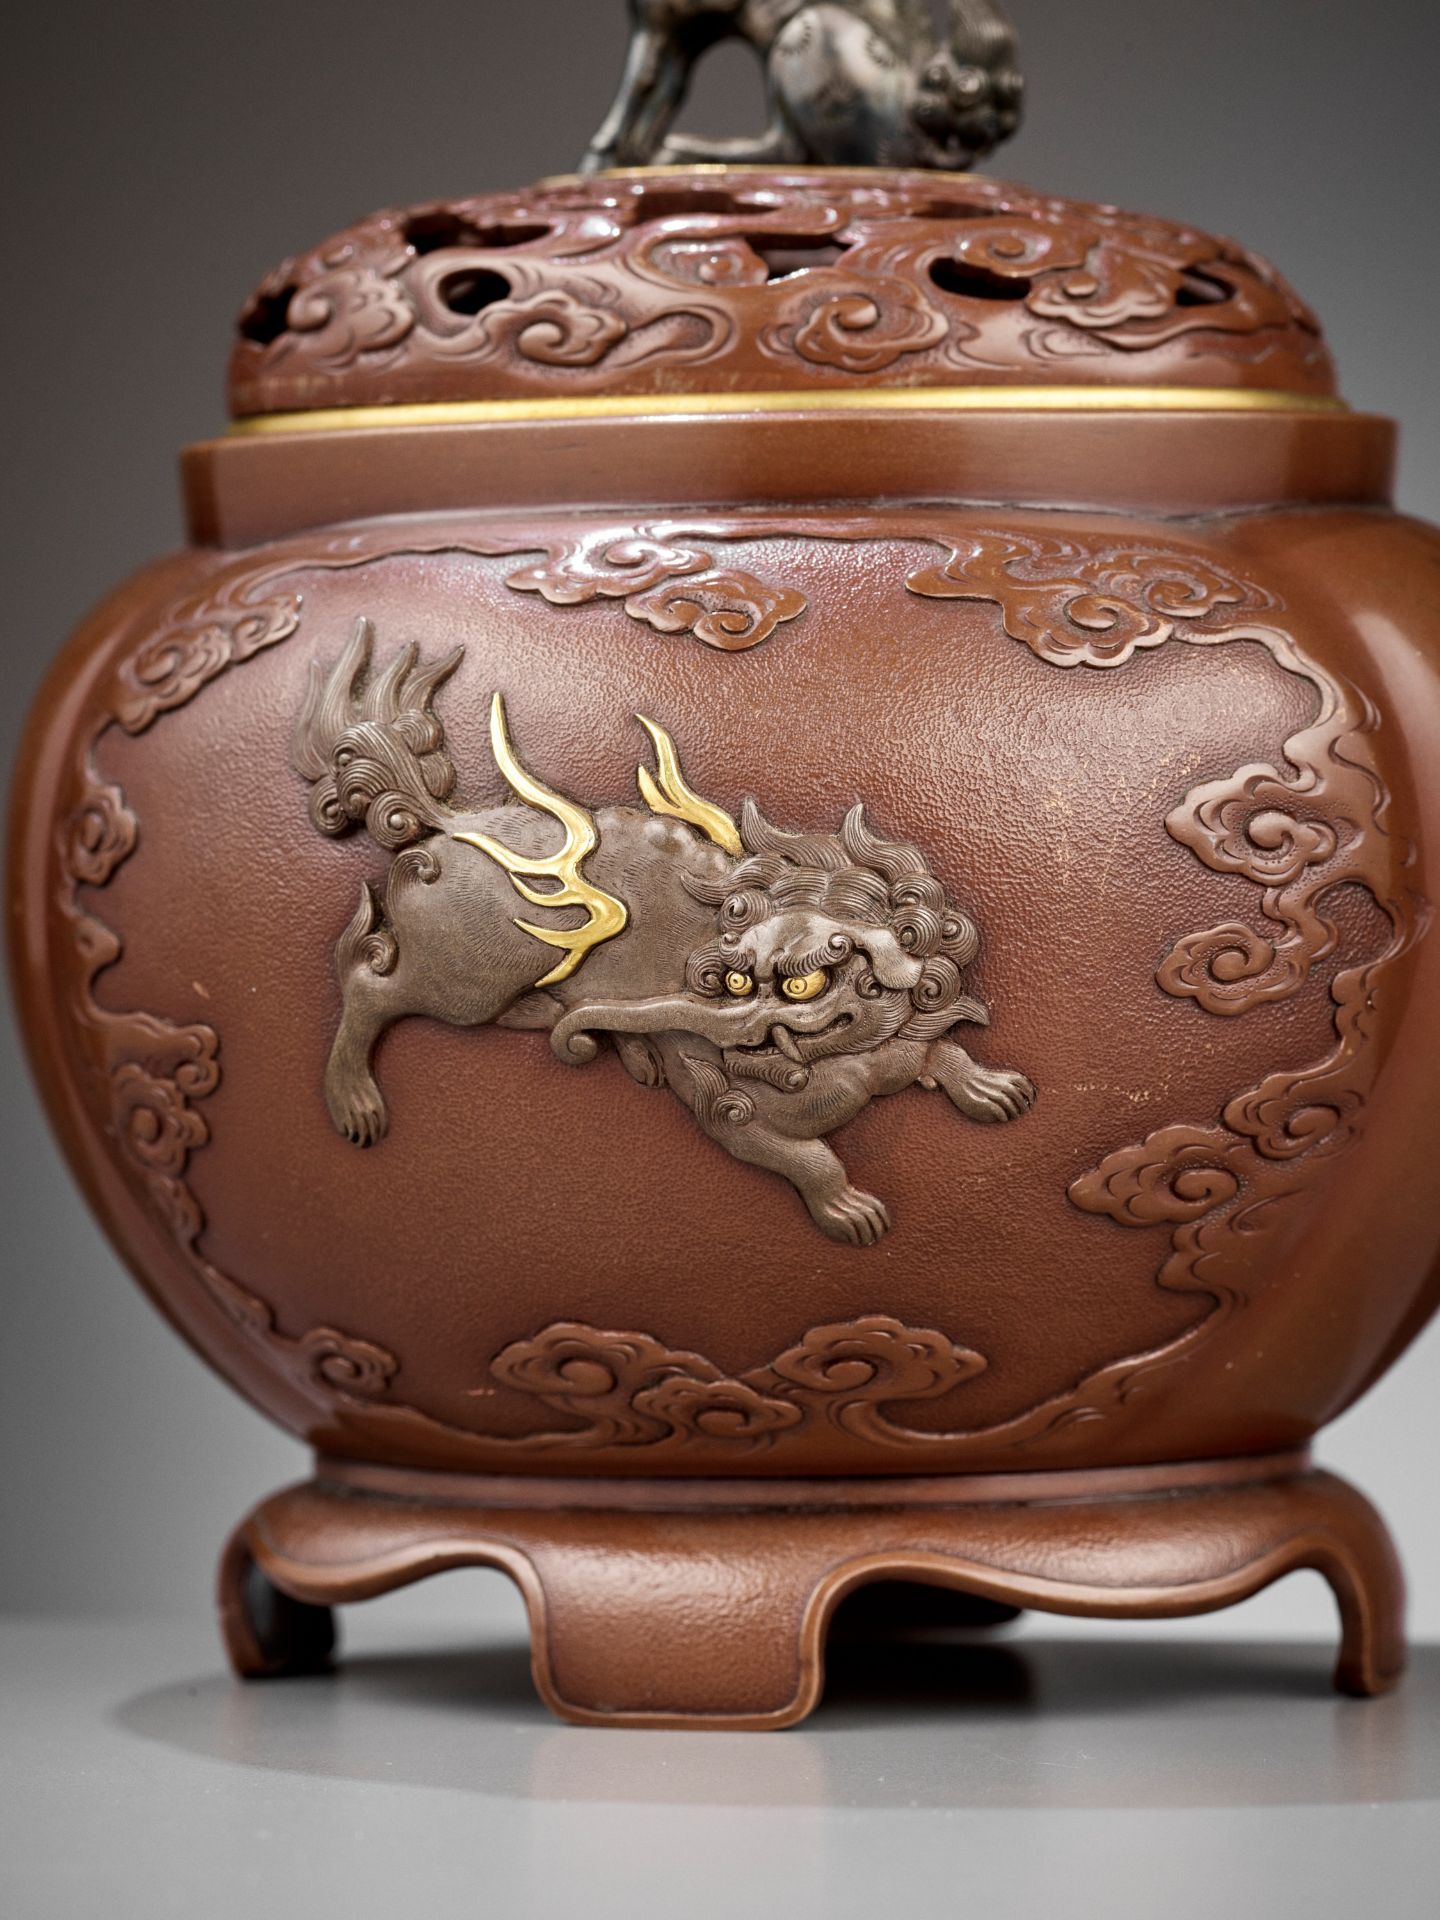 GOTO EIJO: A MASTERFUL INLAID SUAKA (REFINED COPPER) LOBED KORO WITH MYTHICAL BEASTS - Image 3 of 11